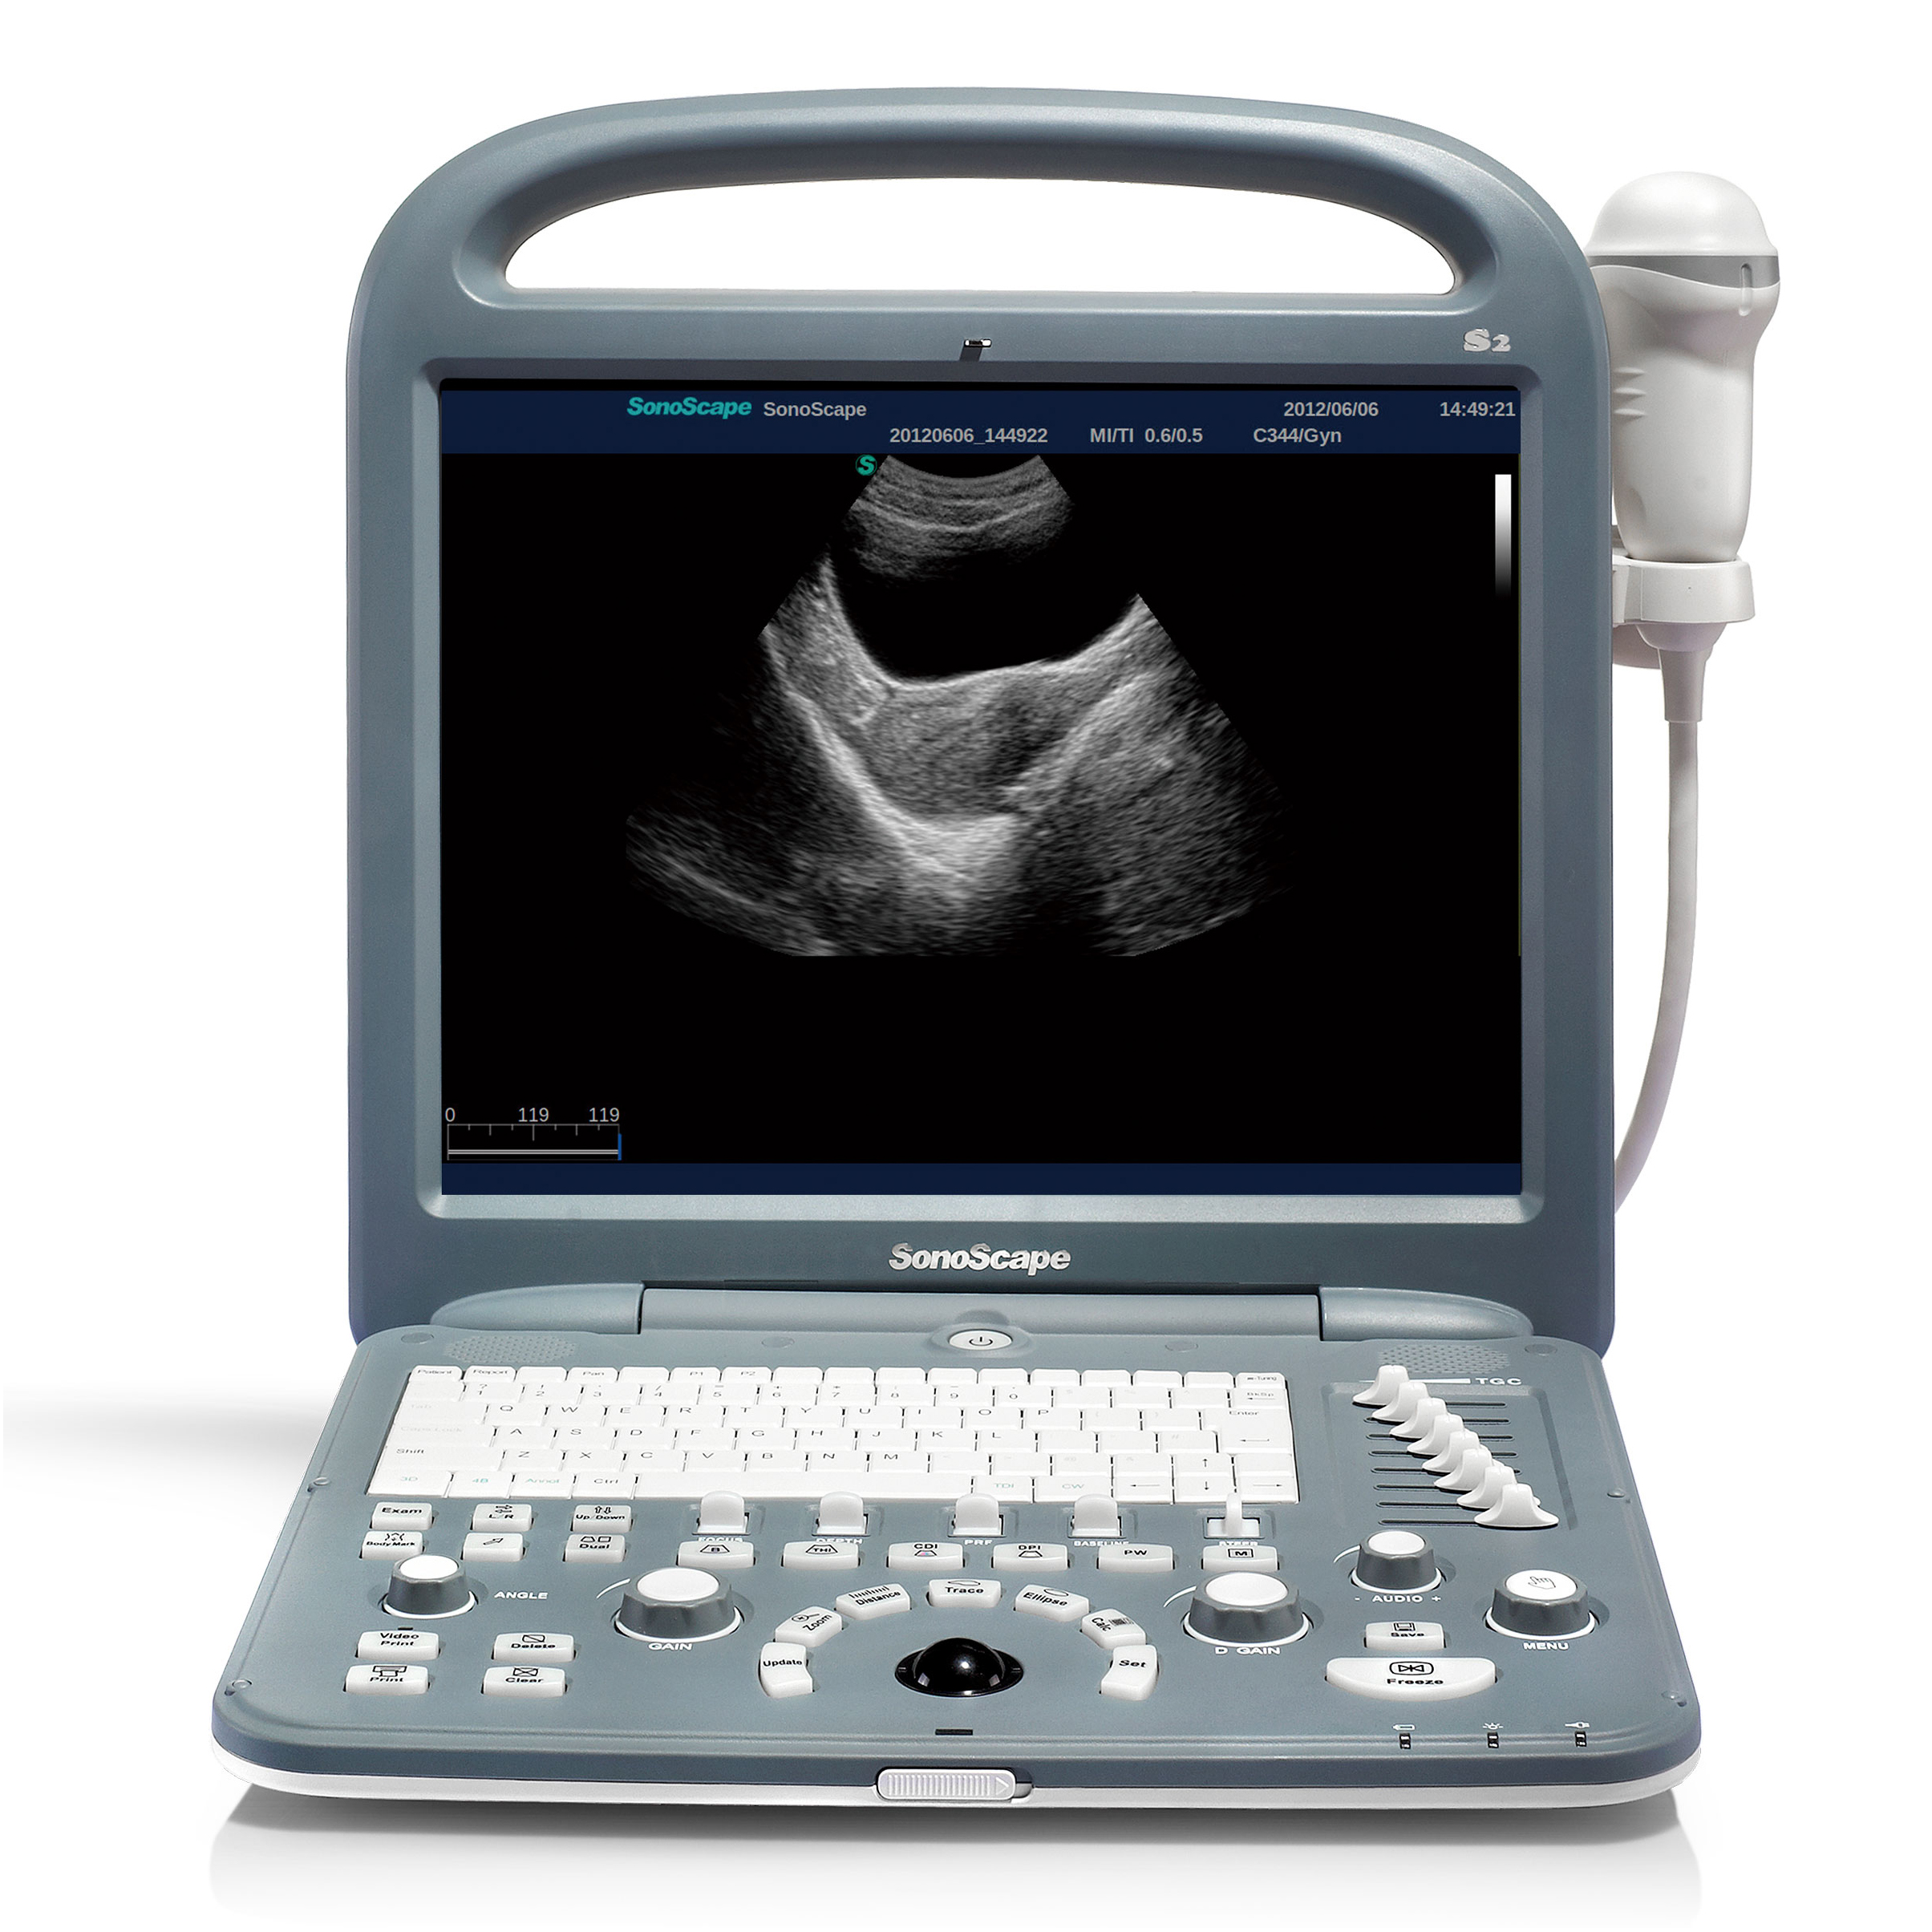 SonoScape S2 High Resolution Hospital Use Portable Laptop Ultrasound Instrument For Cardiology and Emergency Use